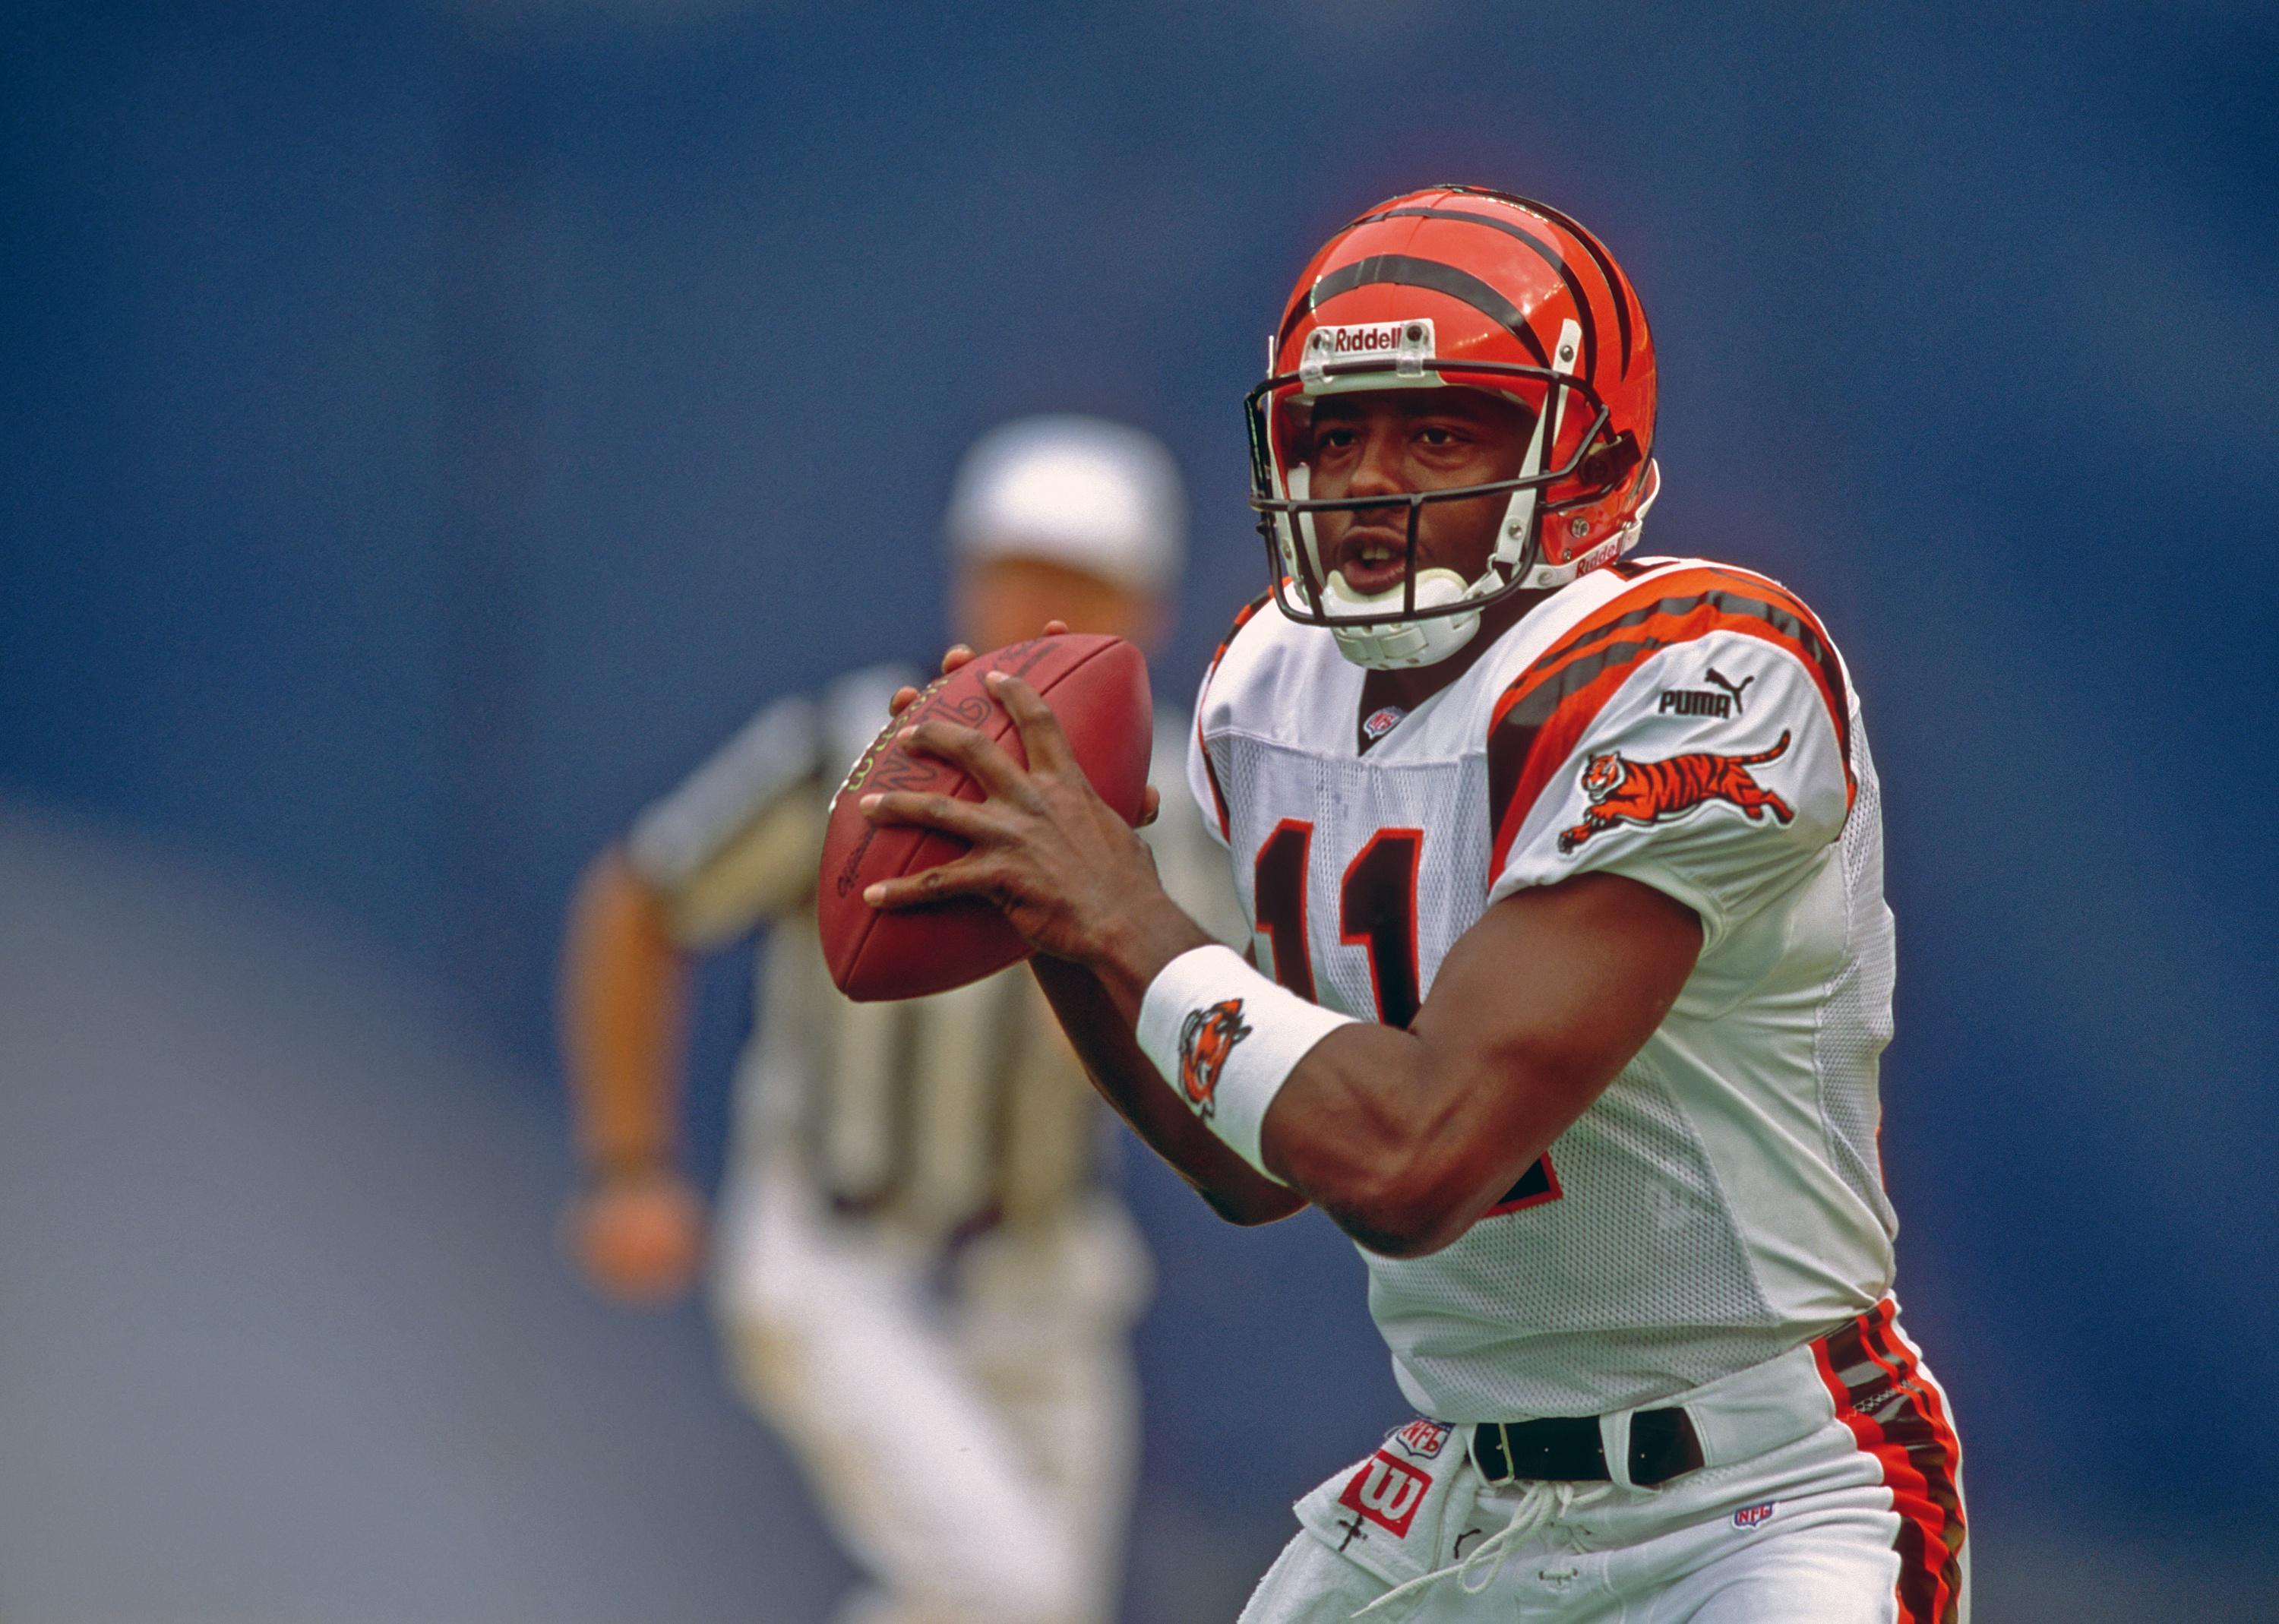 Quarterback Akili Smith of the Cincinnati Bengals looks to pass during a game.